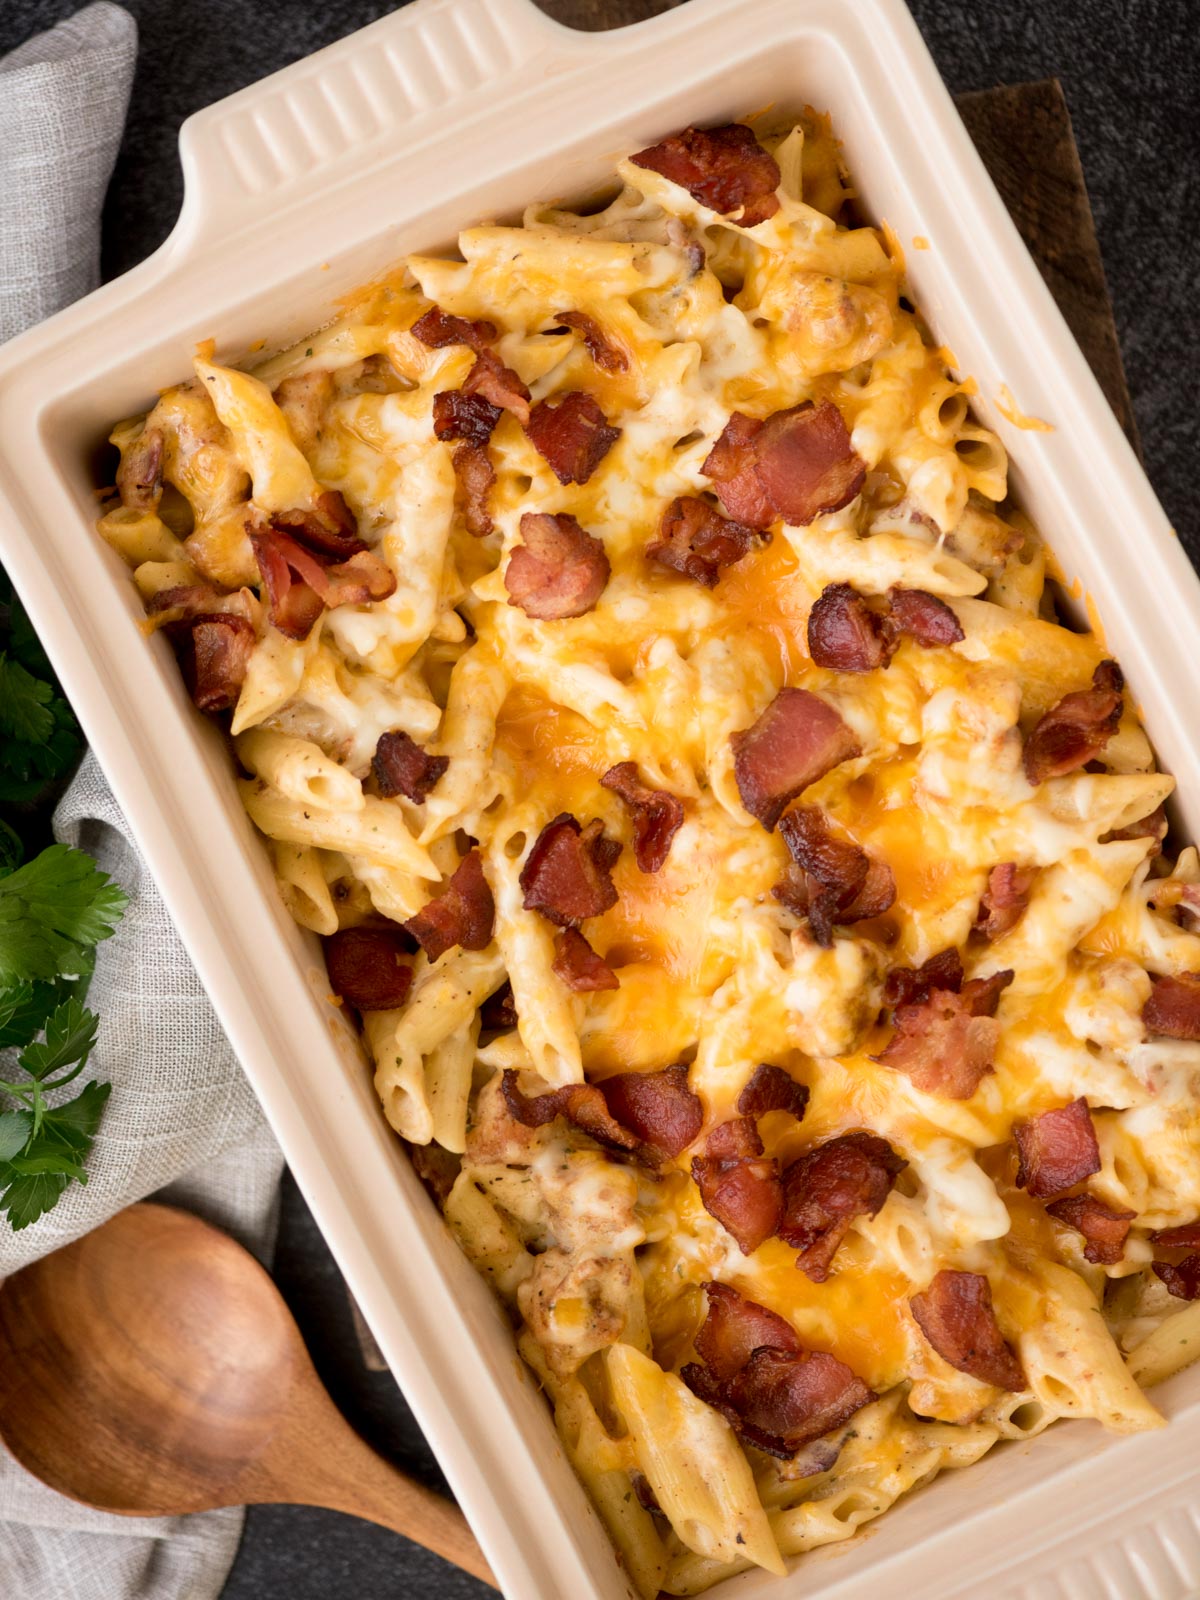 Chicken bacon ranch pasta with melted cheese and bacon over top ready to serve with a wooden spoon resting next to it.